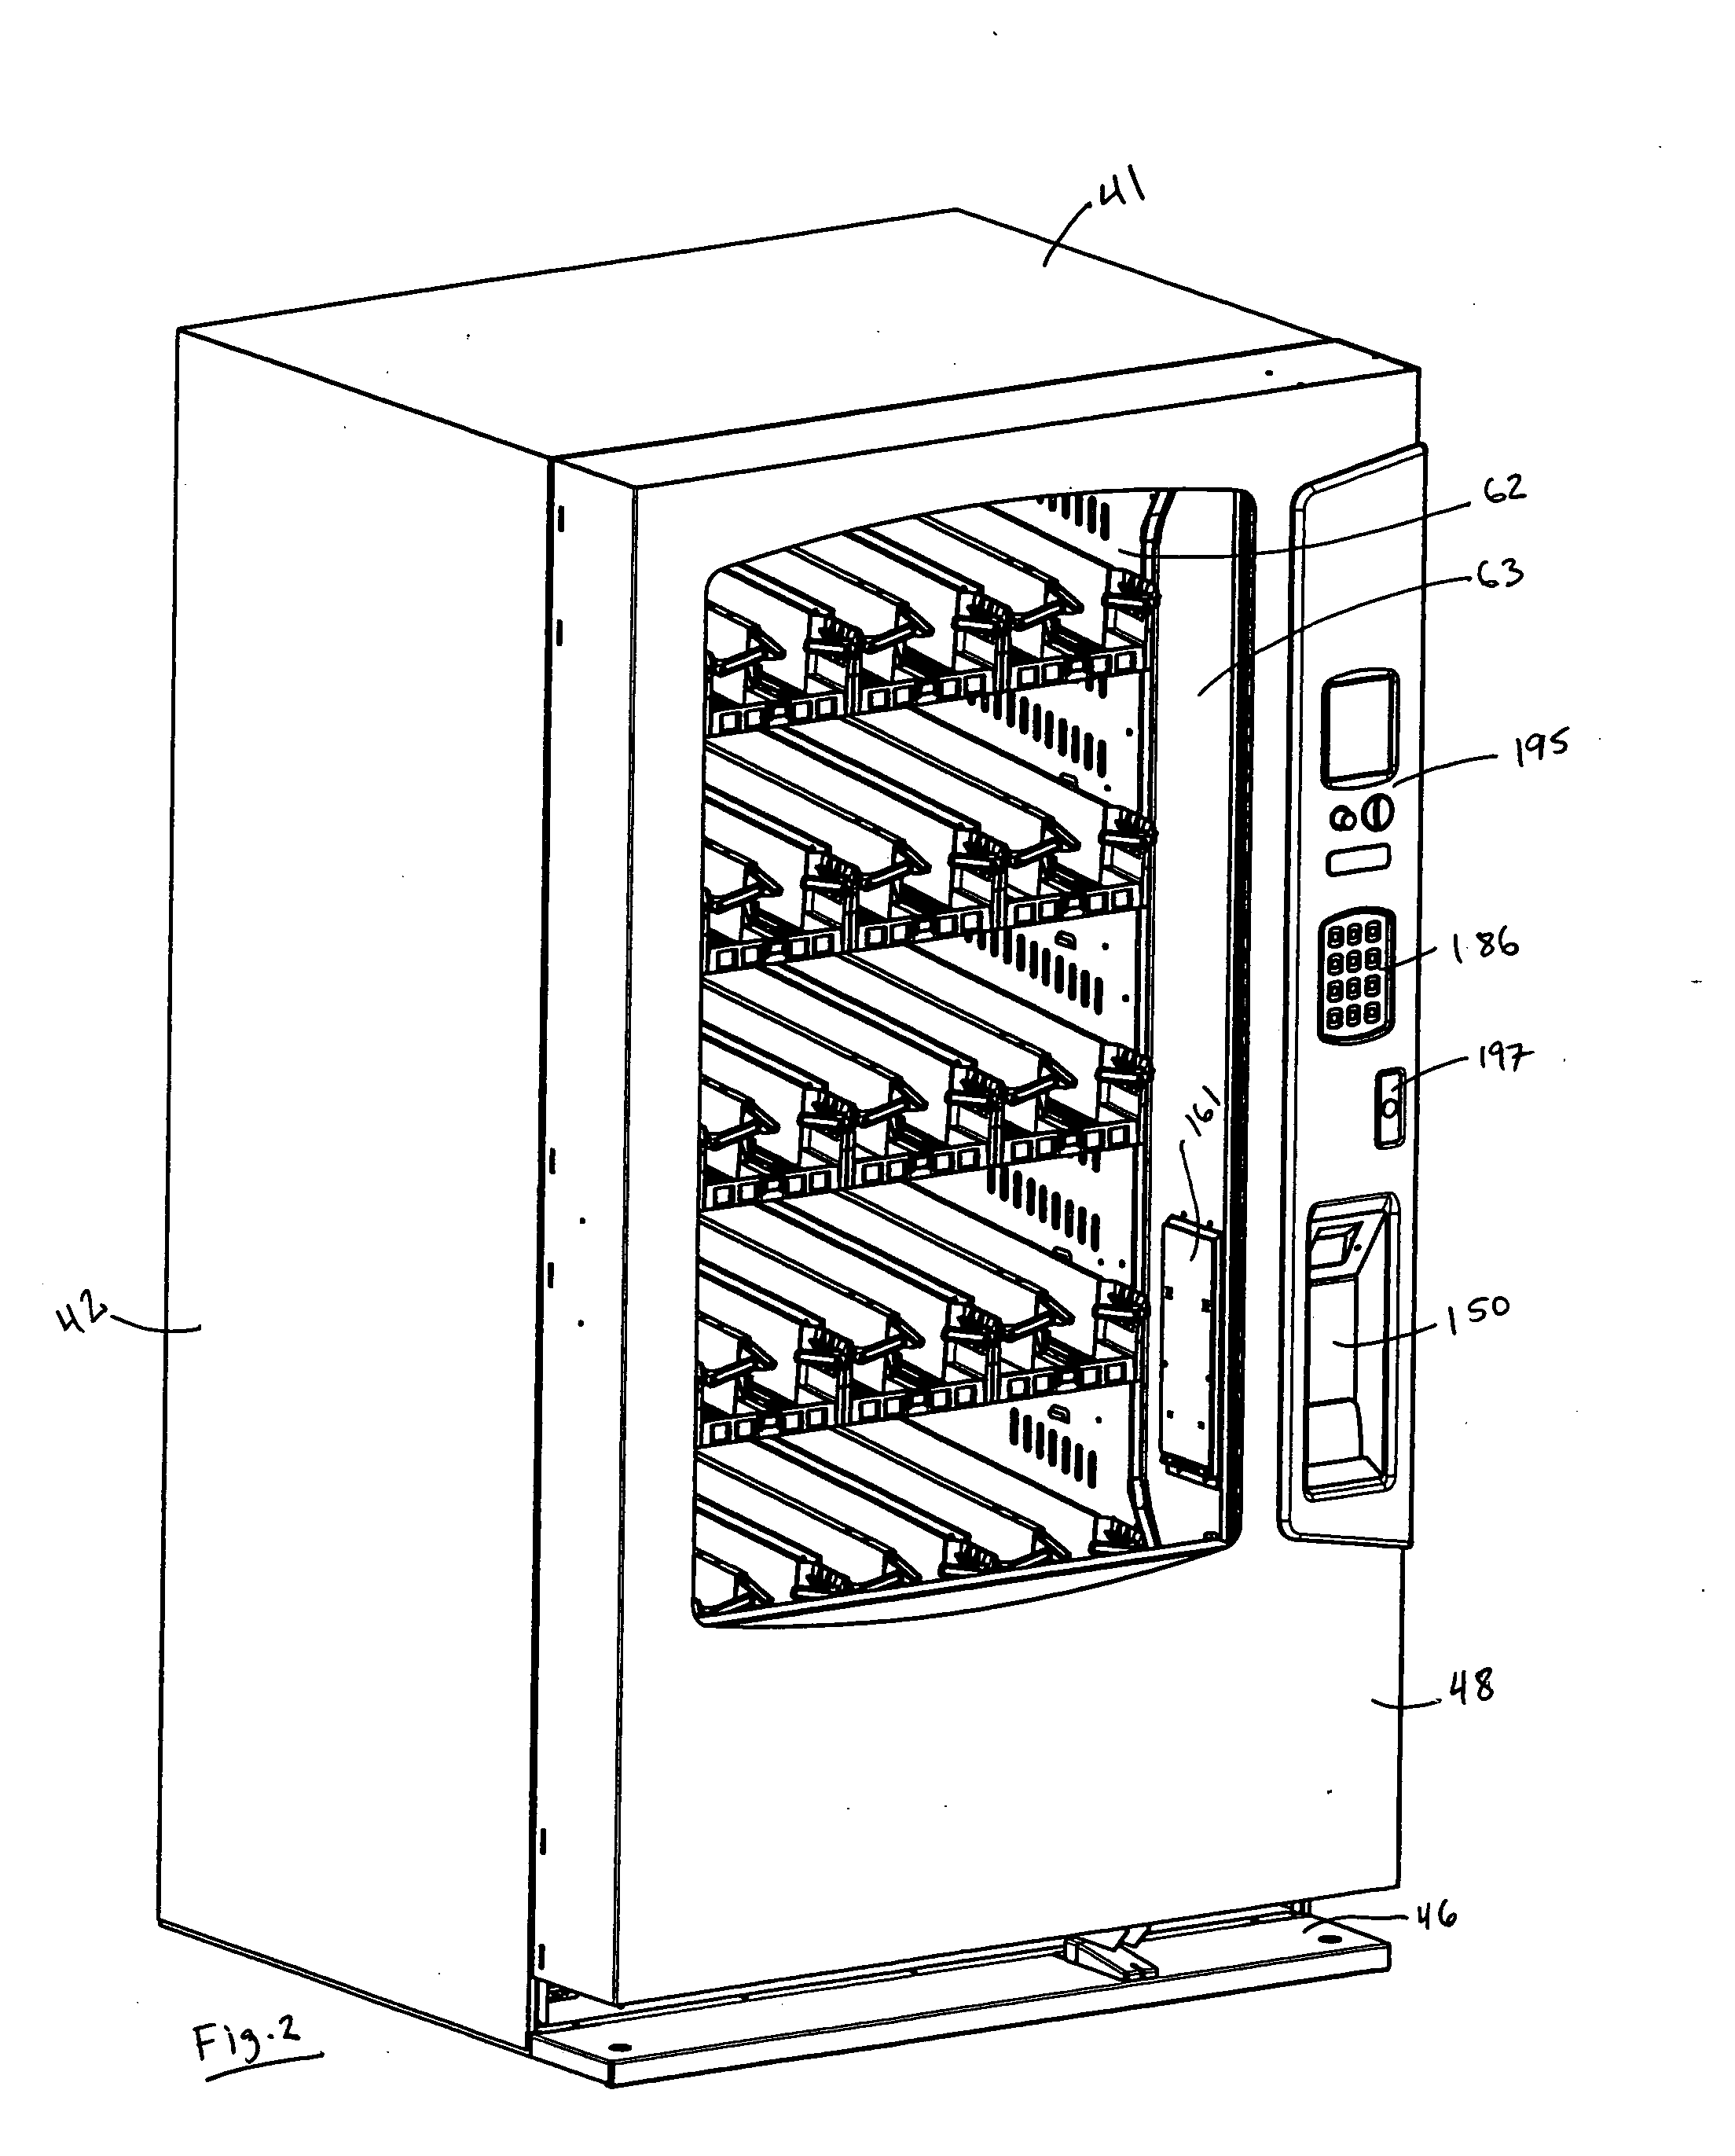 Vending machine and component parts